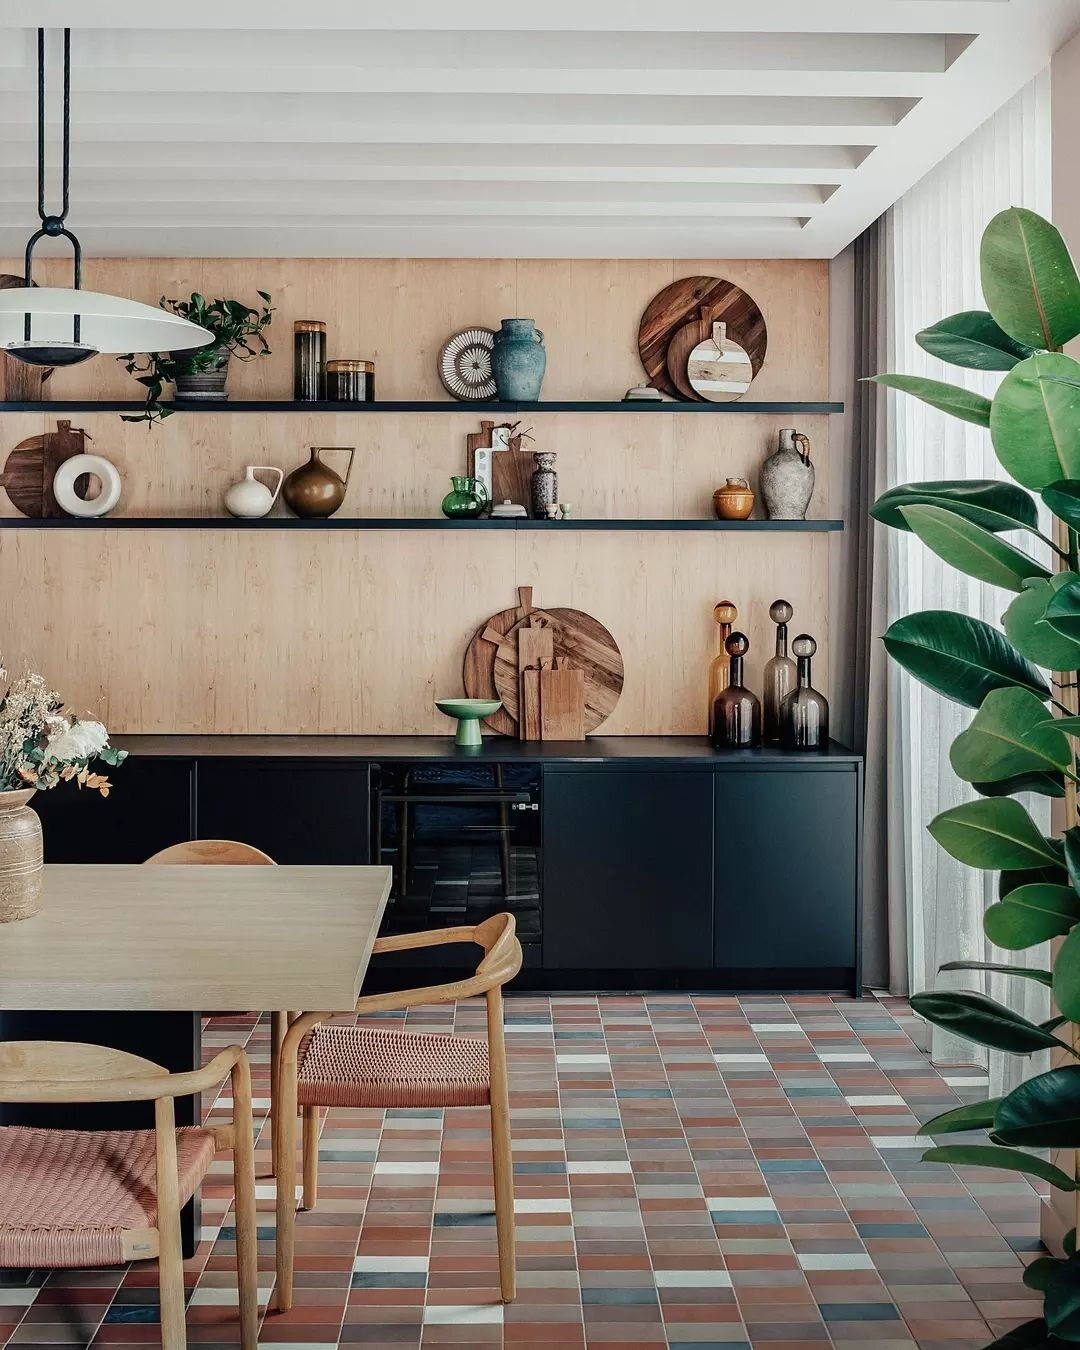 At @authorkingscross, collaborated with @conranandpartners and Related Argent, our communal courtyard kitchen is a symphony of light, texture, and design. The natural wood tone, woven accents, and serene greenery create a space where residents connec